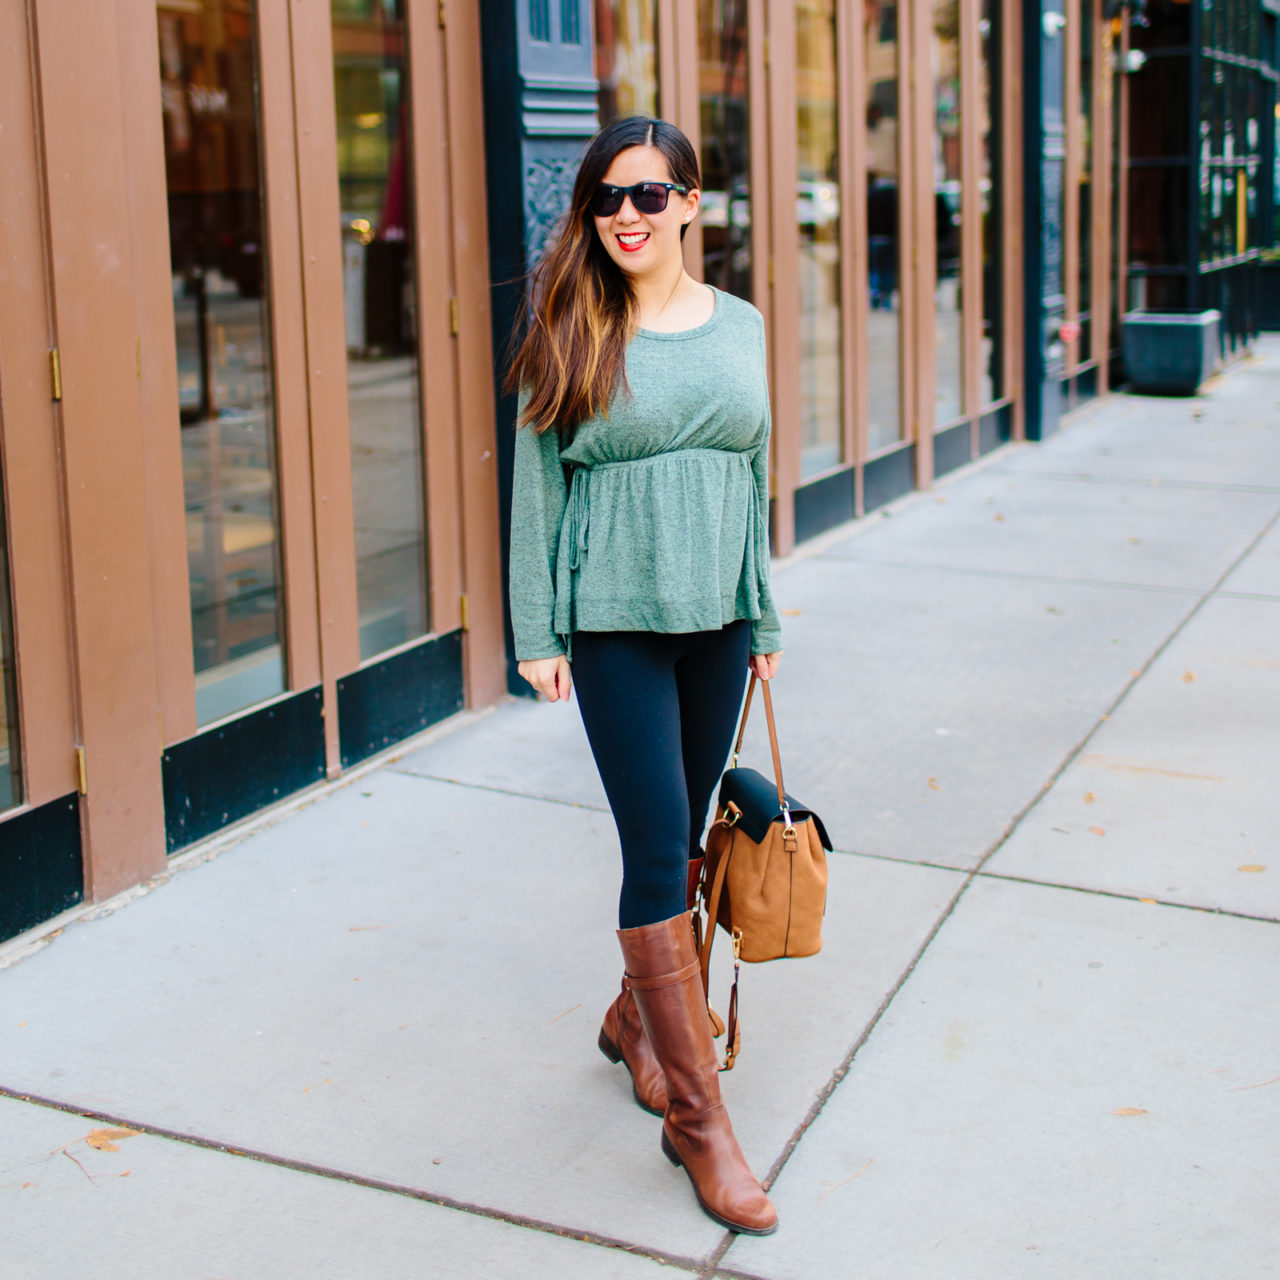 An Under $20 Non-Maternity Top for Pregnant and Non-Pregnant Gals